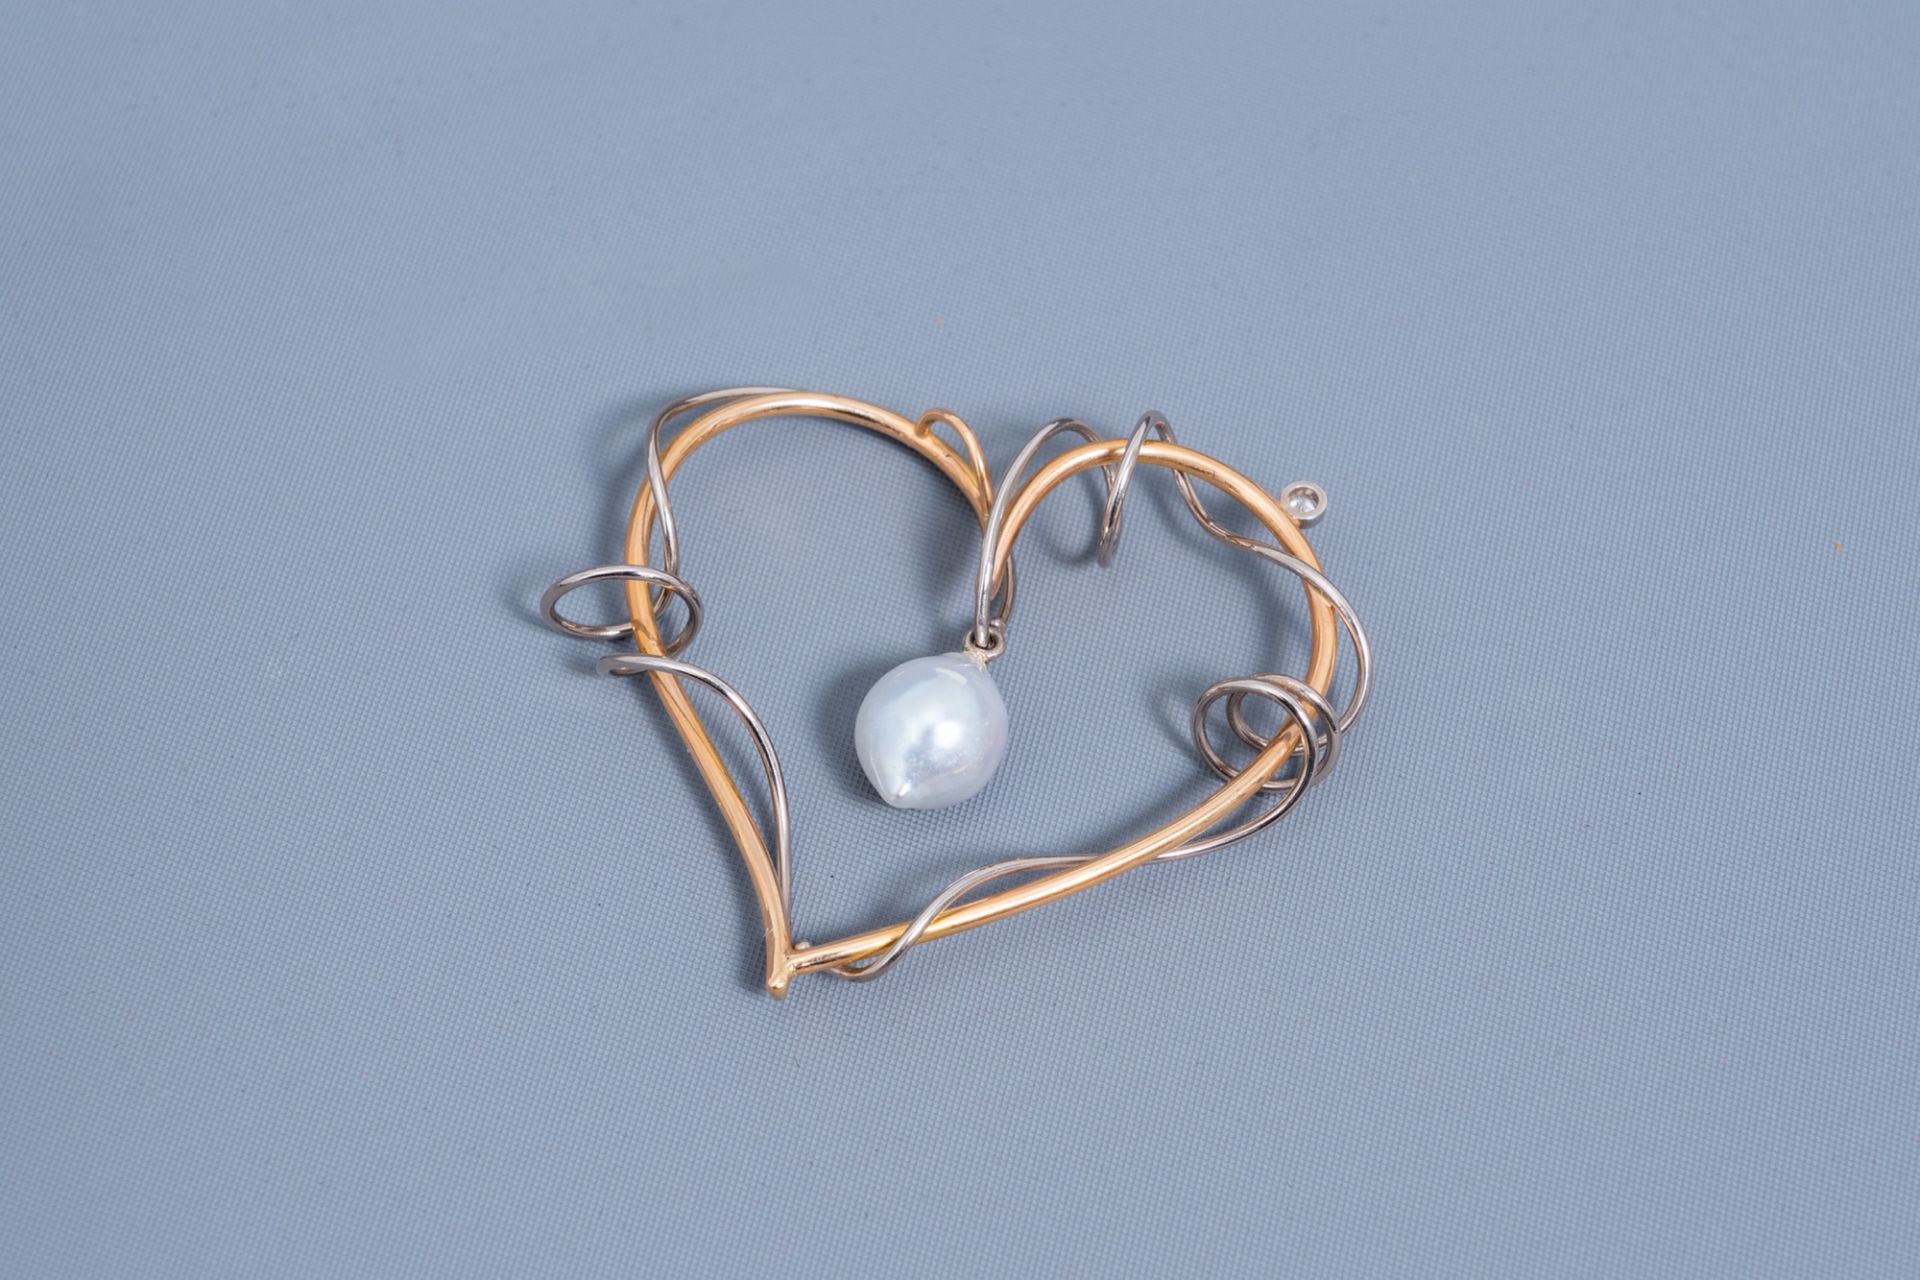 An 18 carat white and yellow heart-shaped pendant set with a diamond and a white South Sea pearl, 20